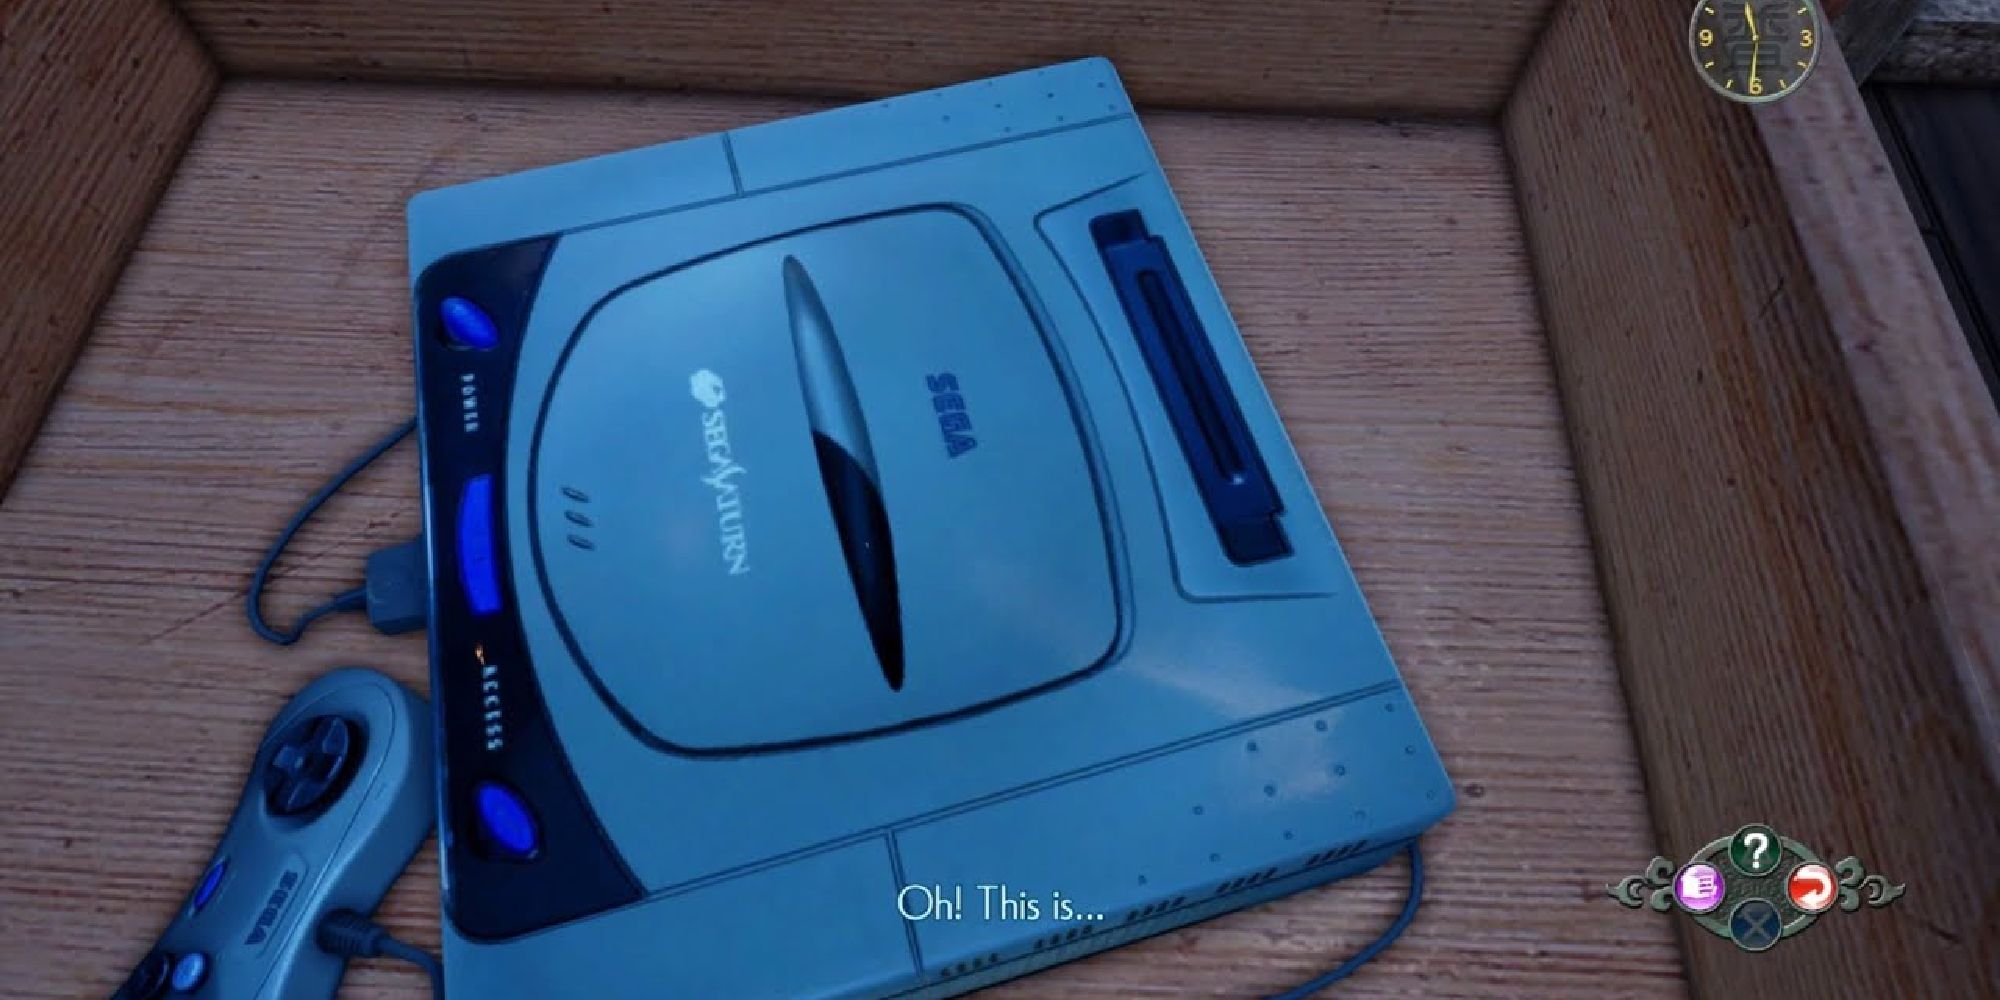 Ryo Hazuki exclaims "Oh! This is..." as he looks at a Sega Saturn in Shenmue 3